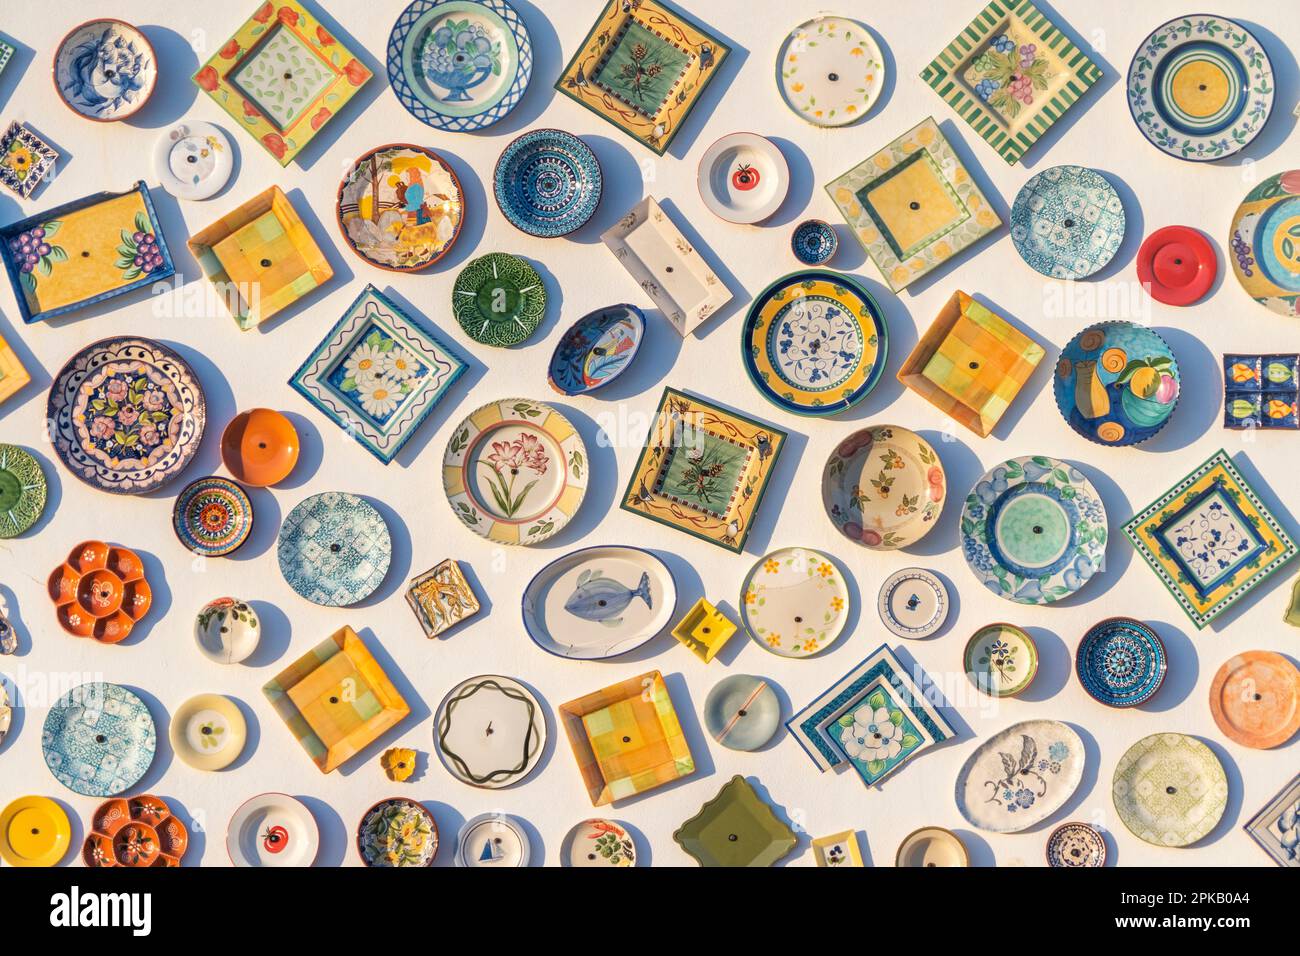 Traditional portuguese pottery, local handcrafted products from Portugal. Wall of ceramic plates in Portugal. Colorful vintage ceramic plates in Sagre Stock Photo